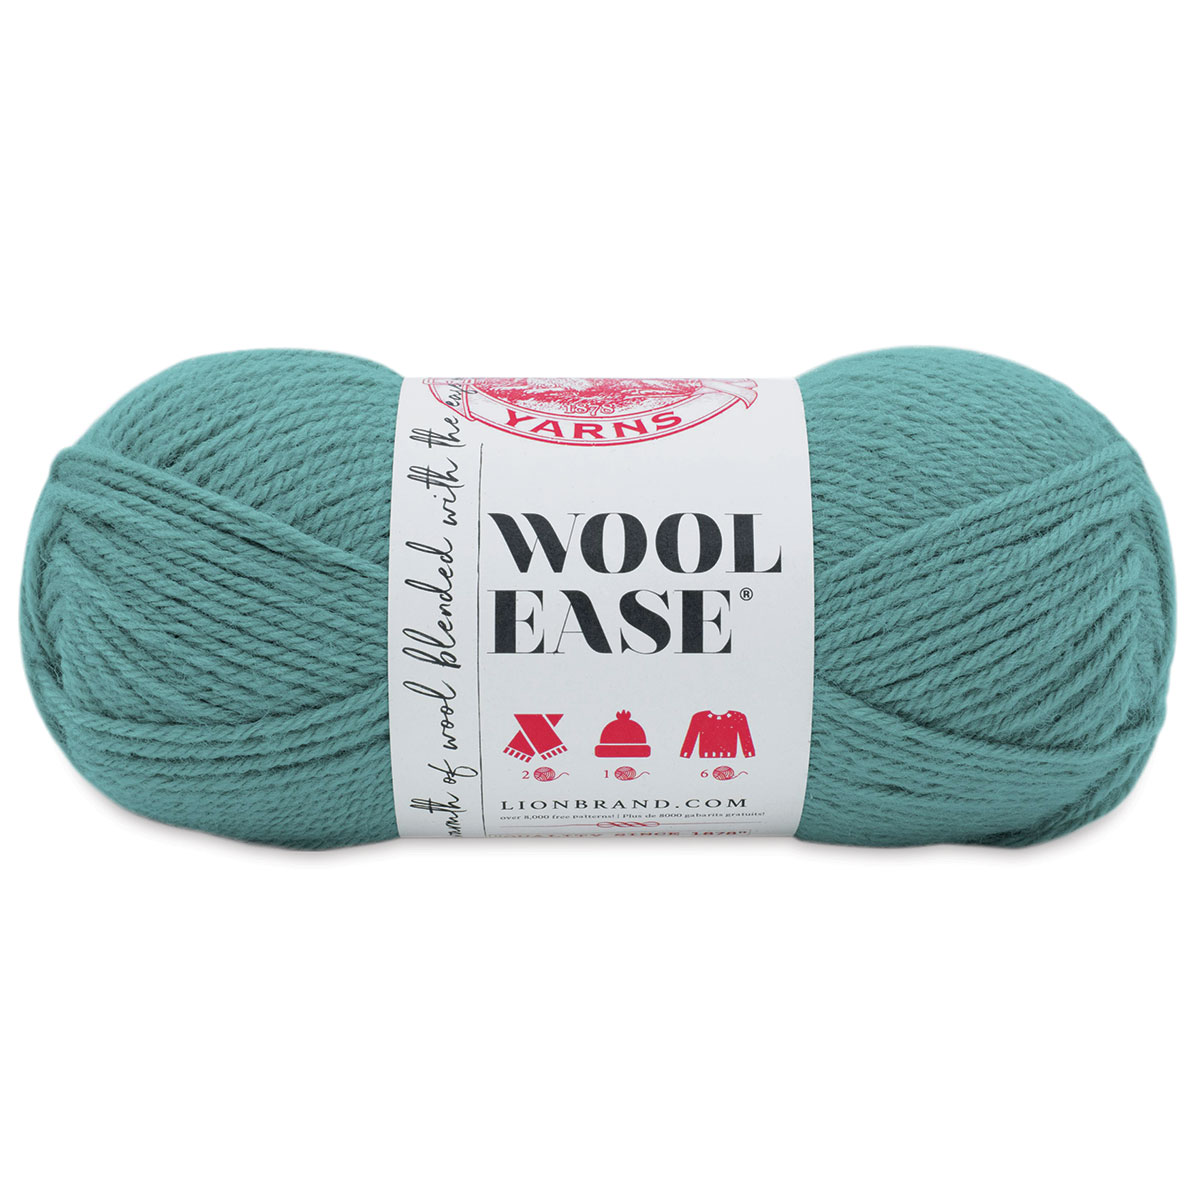 Lion Brand Yarn Wool-ease Worsted Weight Yarn Lamb's Wool 153 3 Oz AT508  Lot of 2 